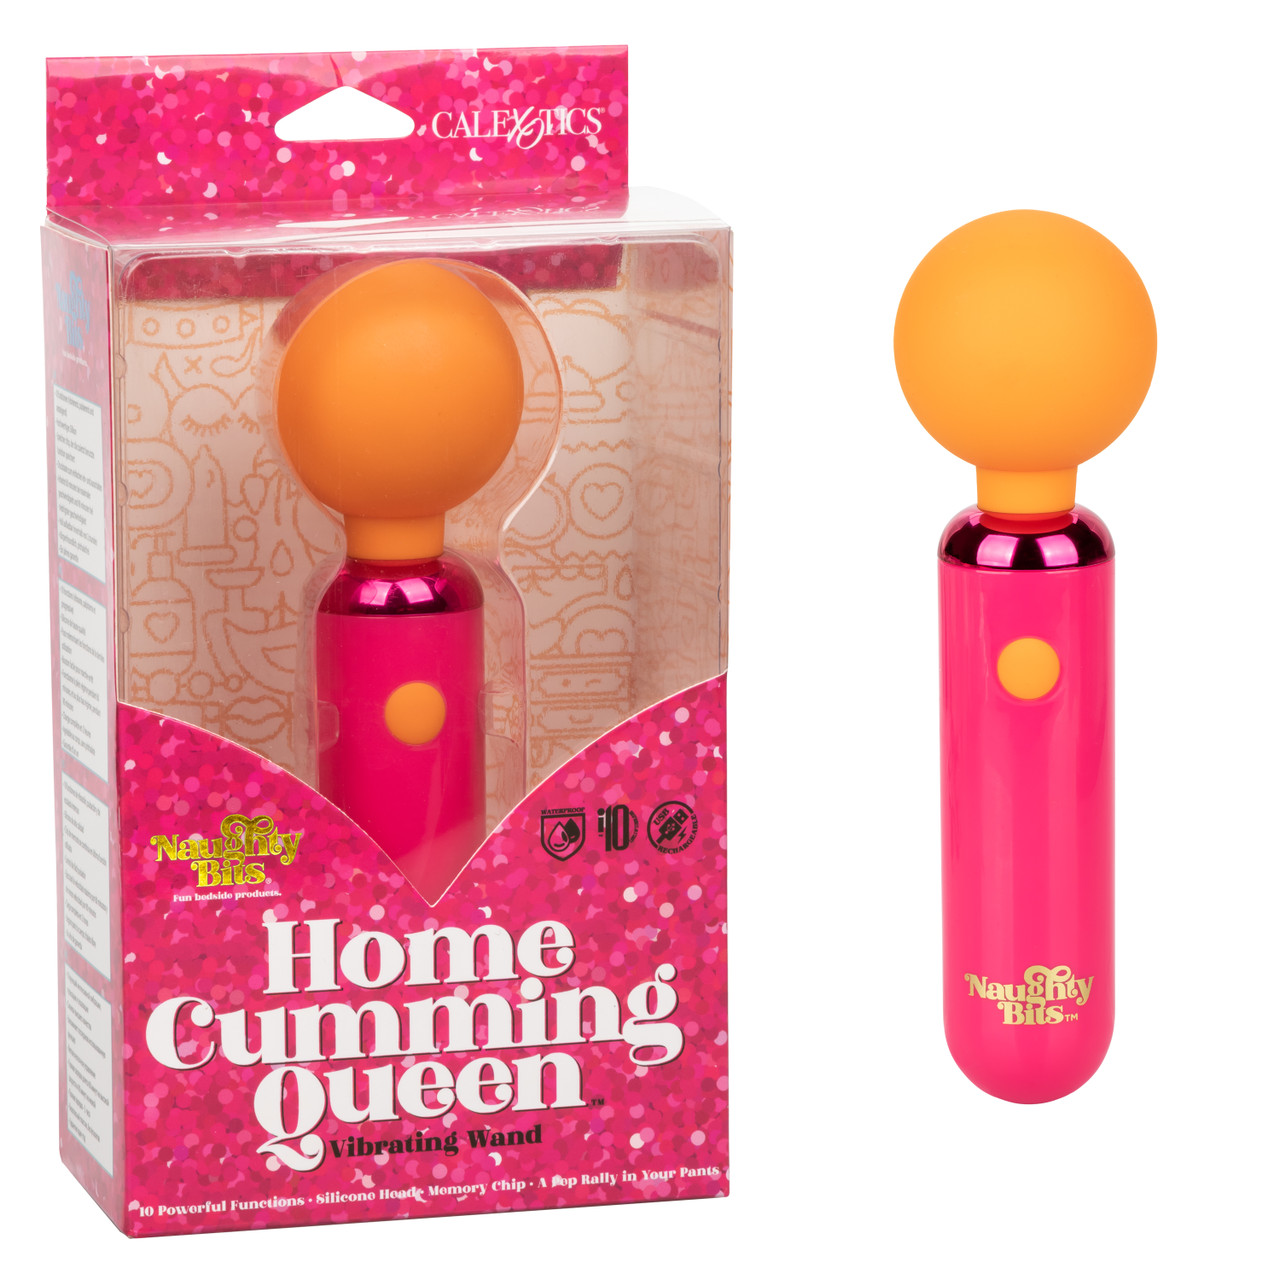 NAUGHTY BITS HOME CUMMING QUEEN VIBRATING WAND